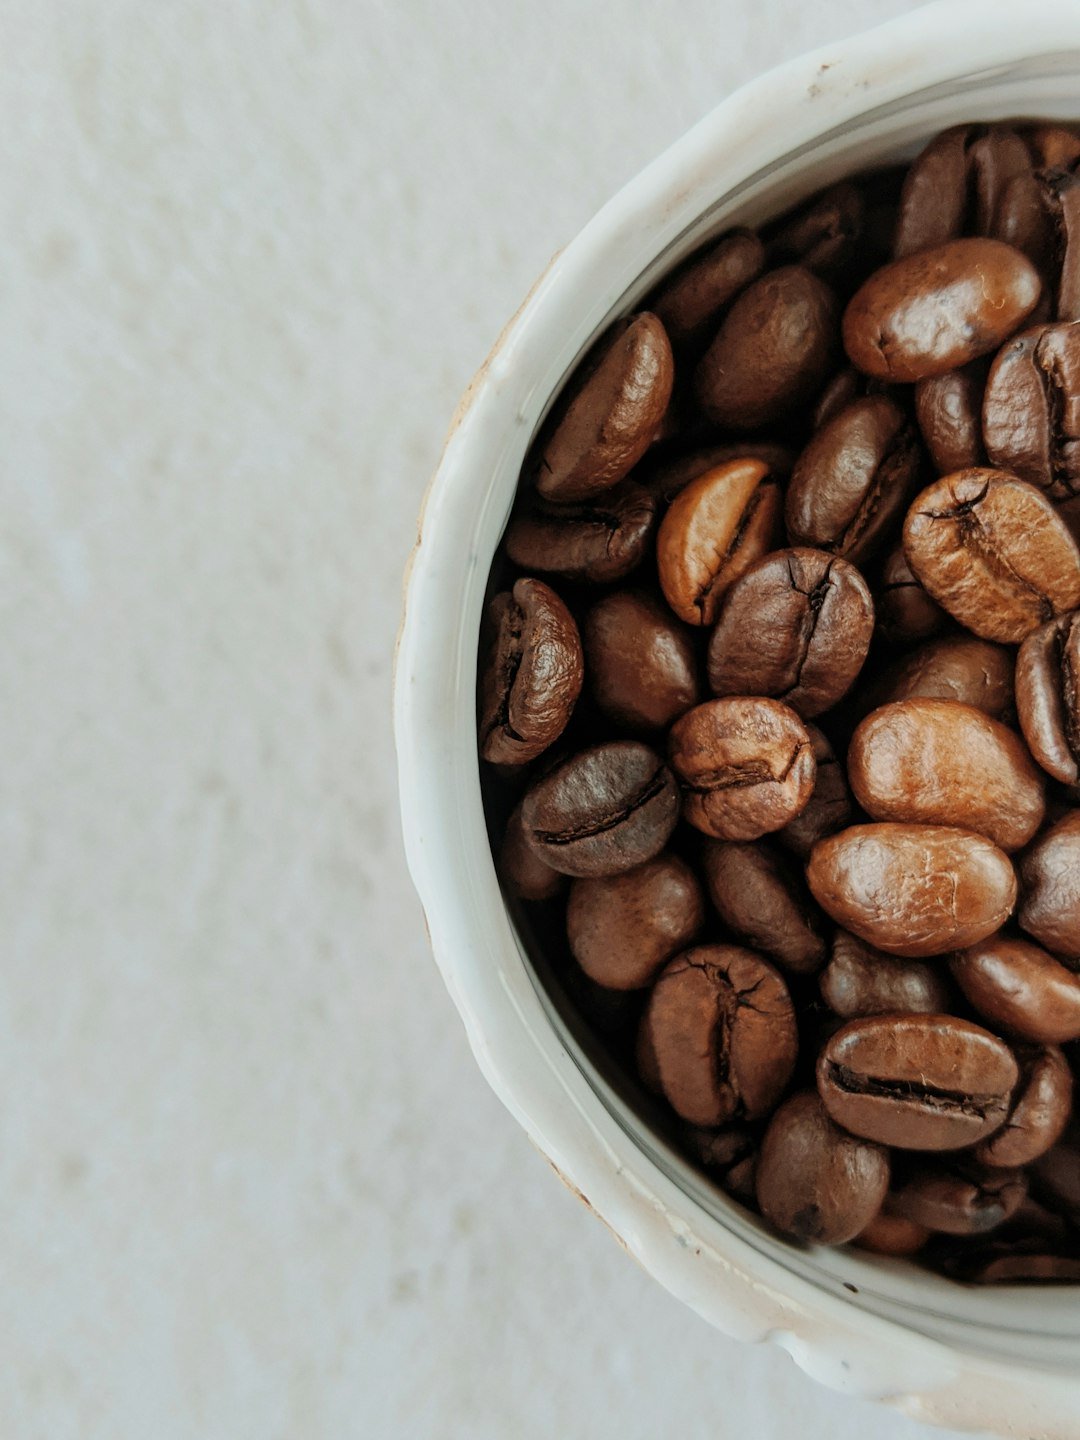 Uncover the Rich History of Your Beloved Coffee - TI.CO